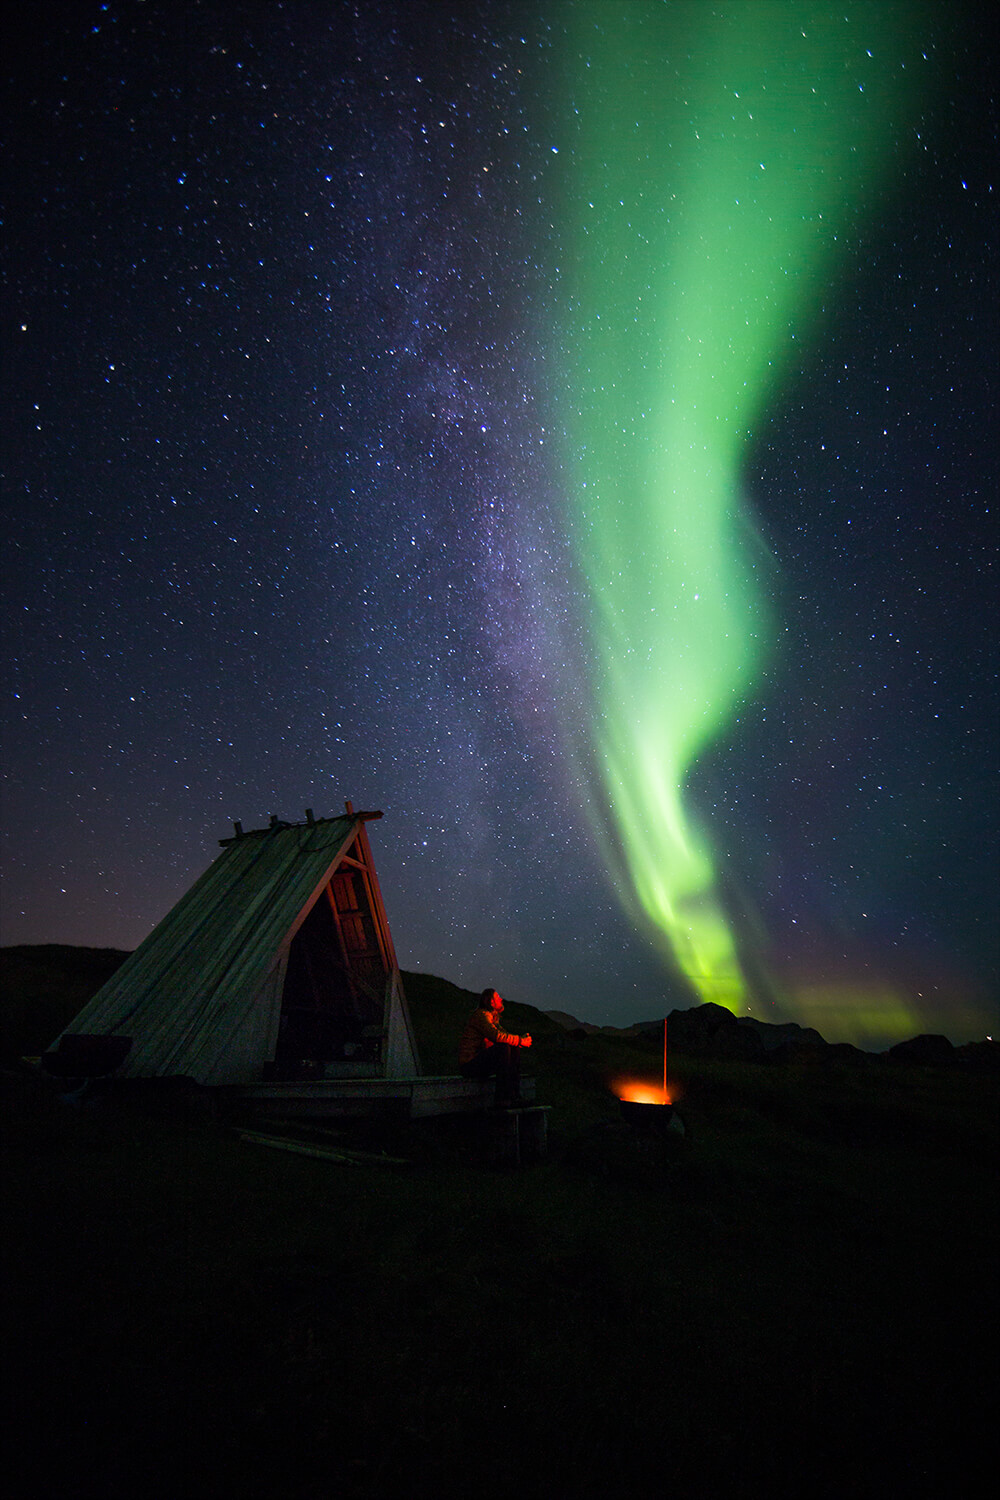 A person in front of a bonfire under the northern lights. Image by Neil Bloem